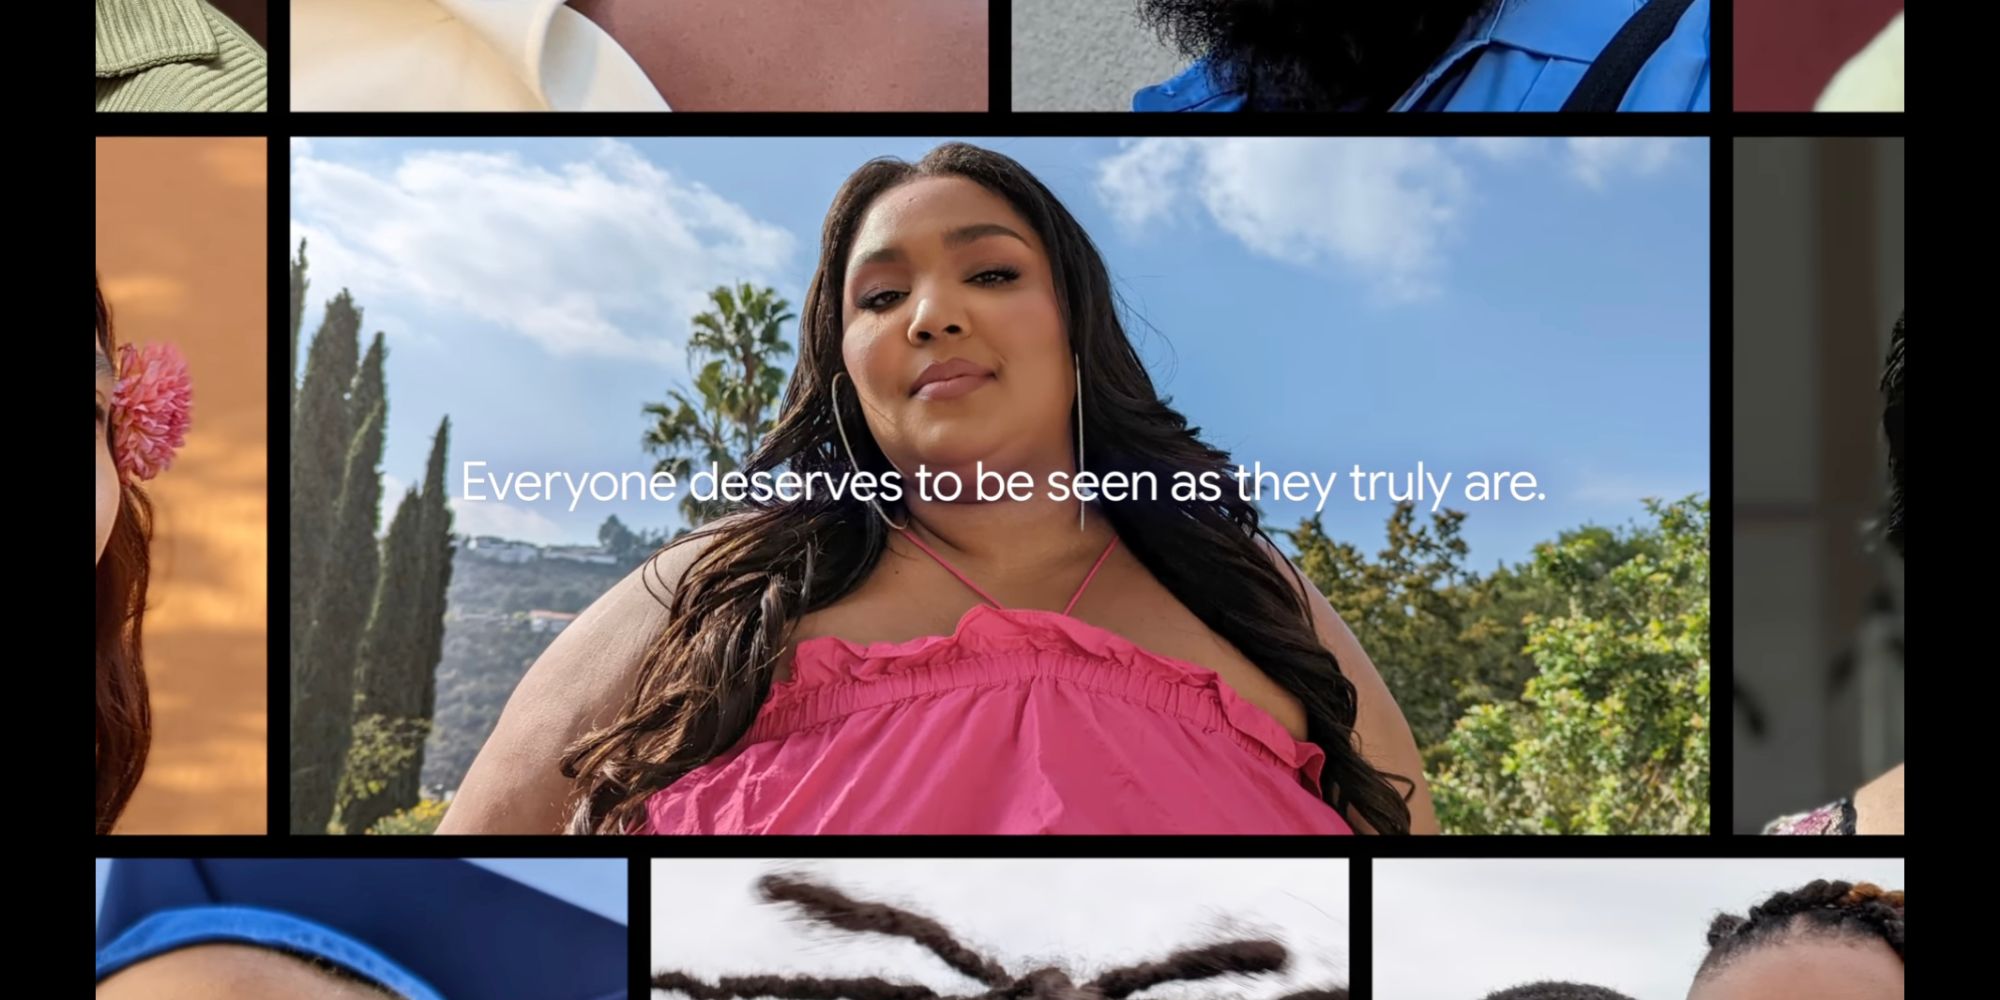 This Is The Pixel 6 Commercial Song That You Can't Stop Thinking About